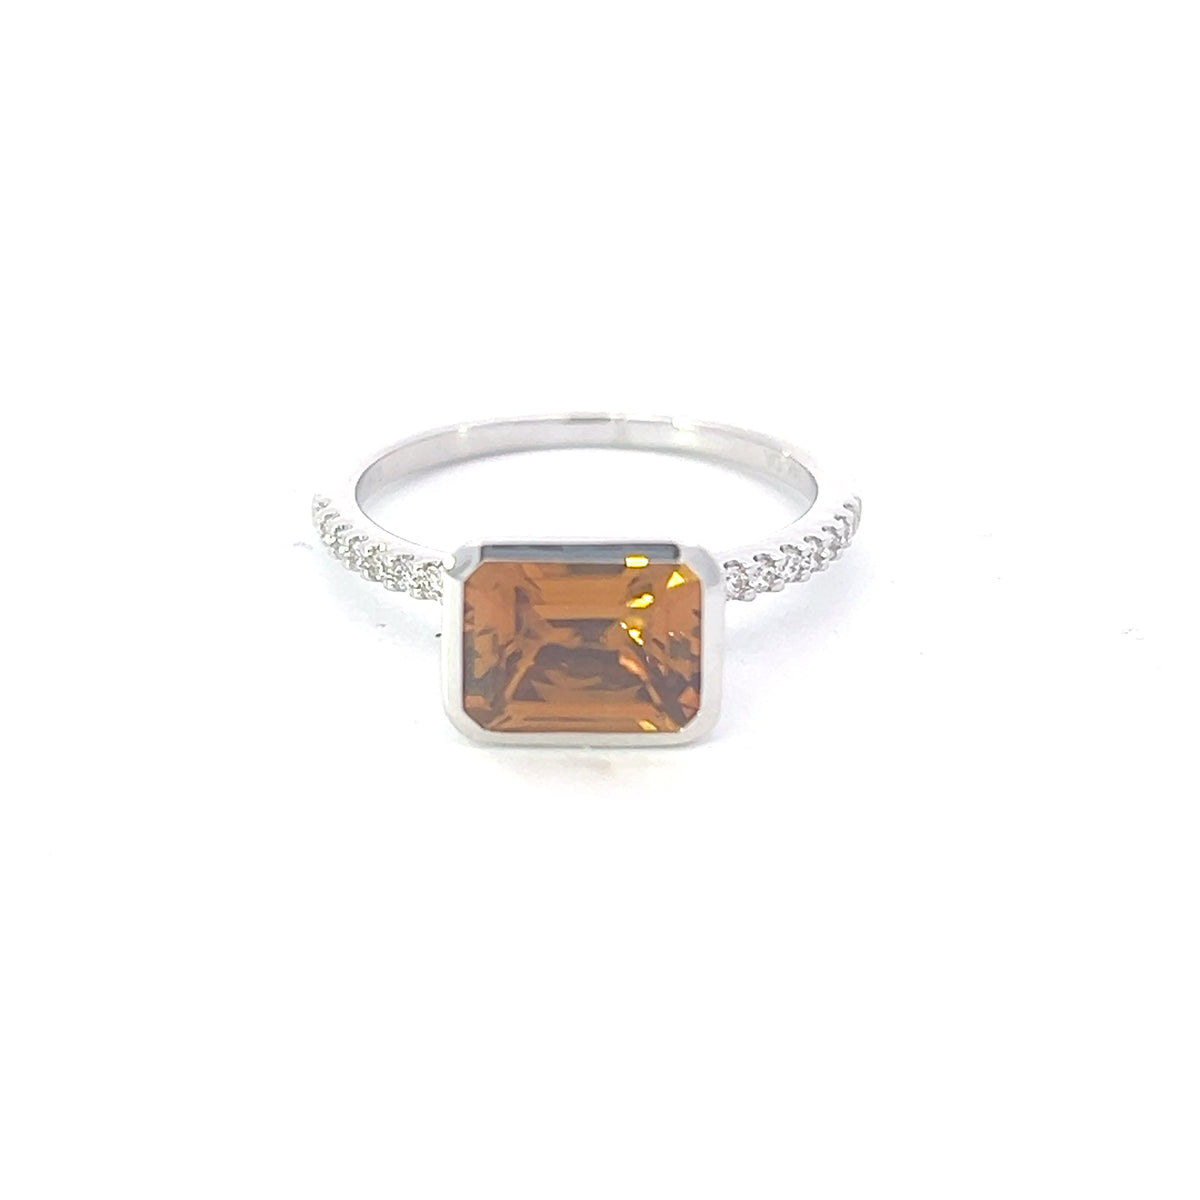 TRACKING - 14K 1.28cttw Citrine and 0.14cttw Diamond Ring - Size 7